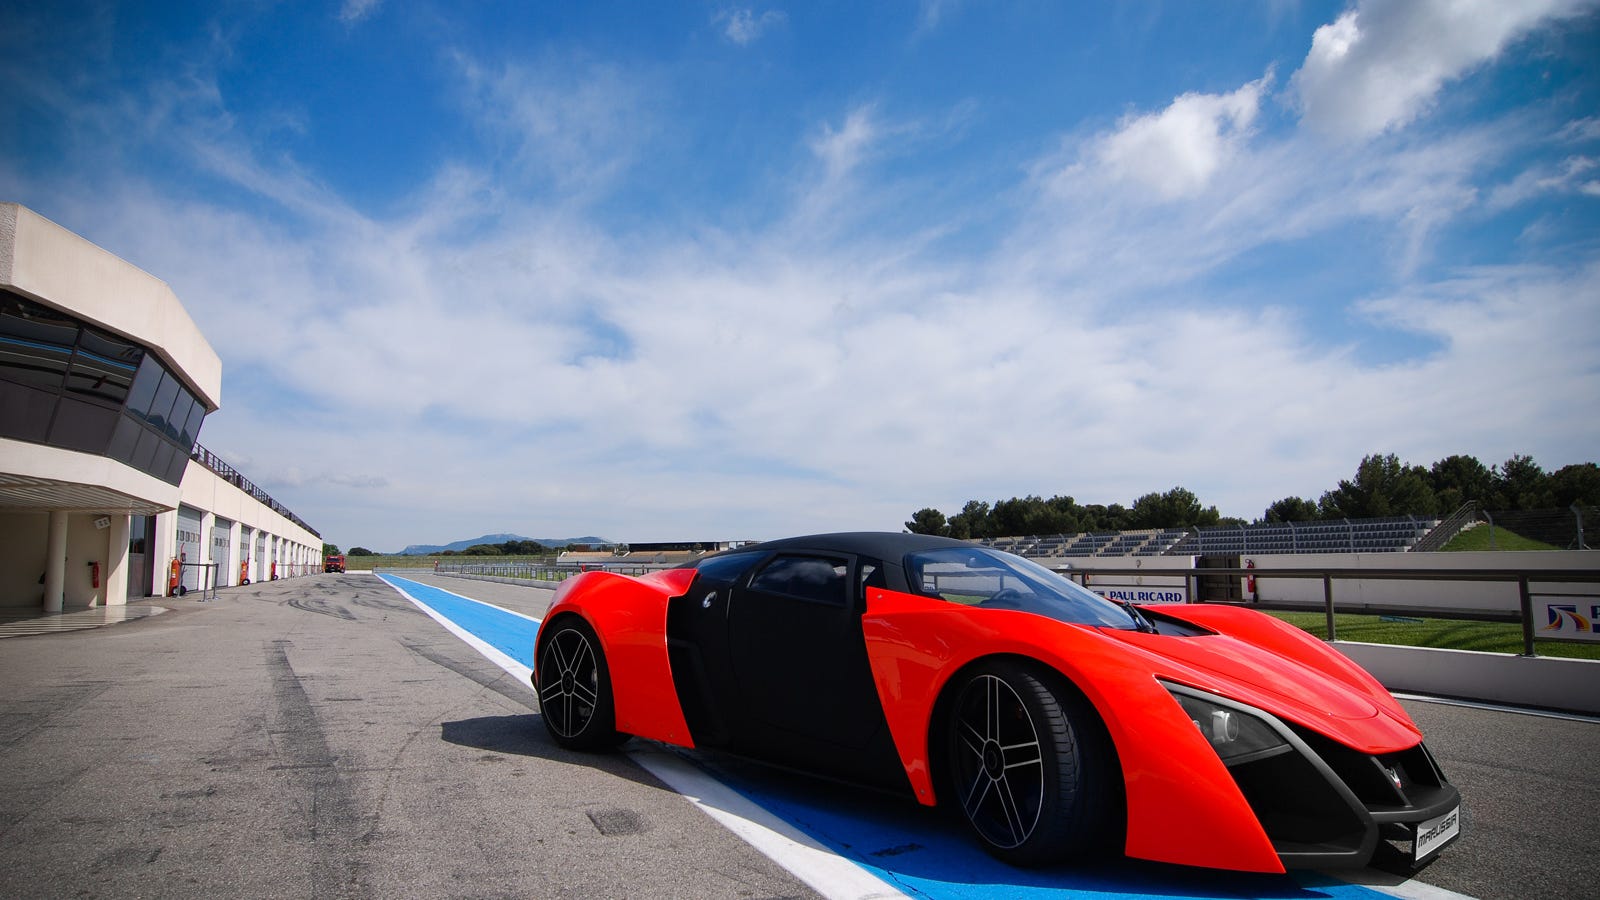 The Marussia Actually Looks Pretty Badass On A Track